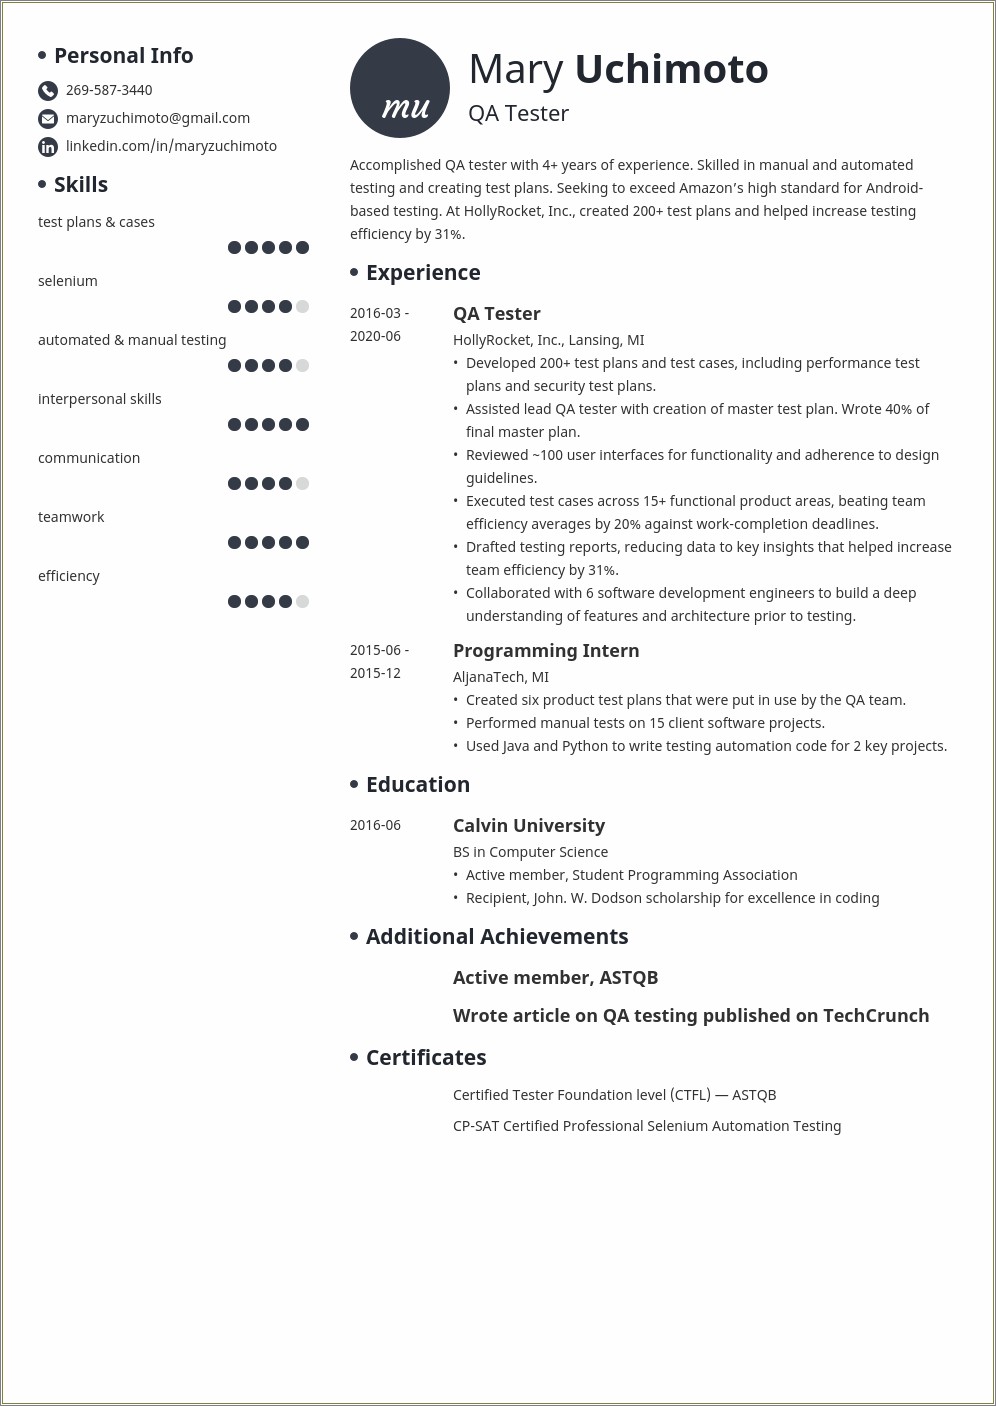 Resume Summary For Qa And Sales